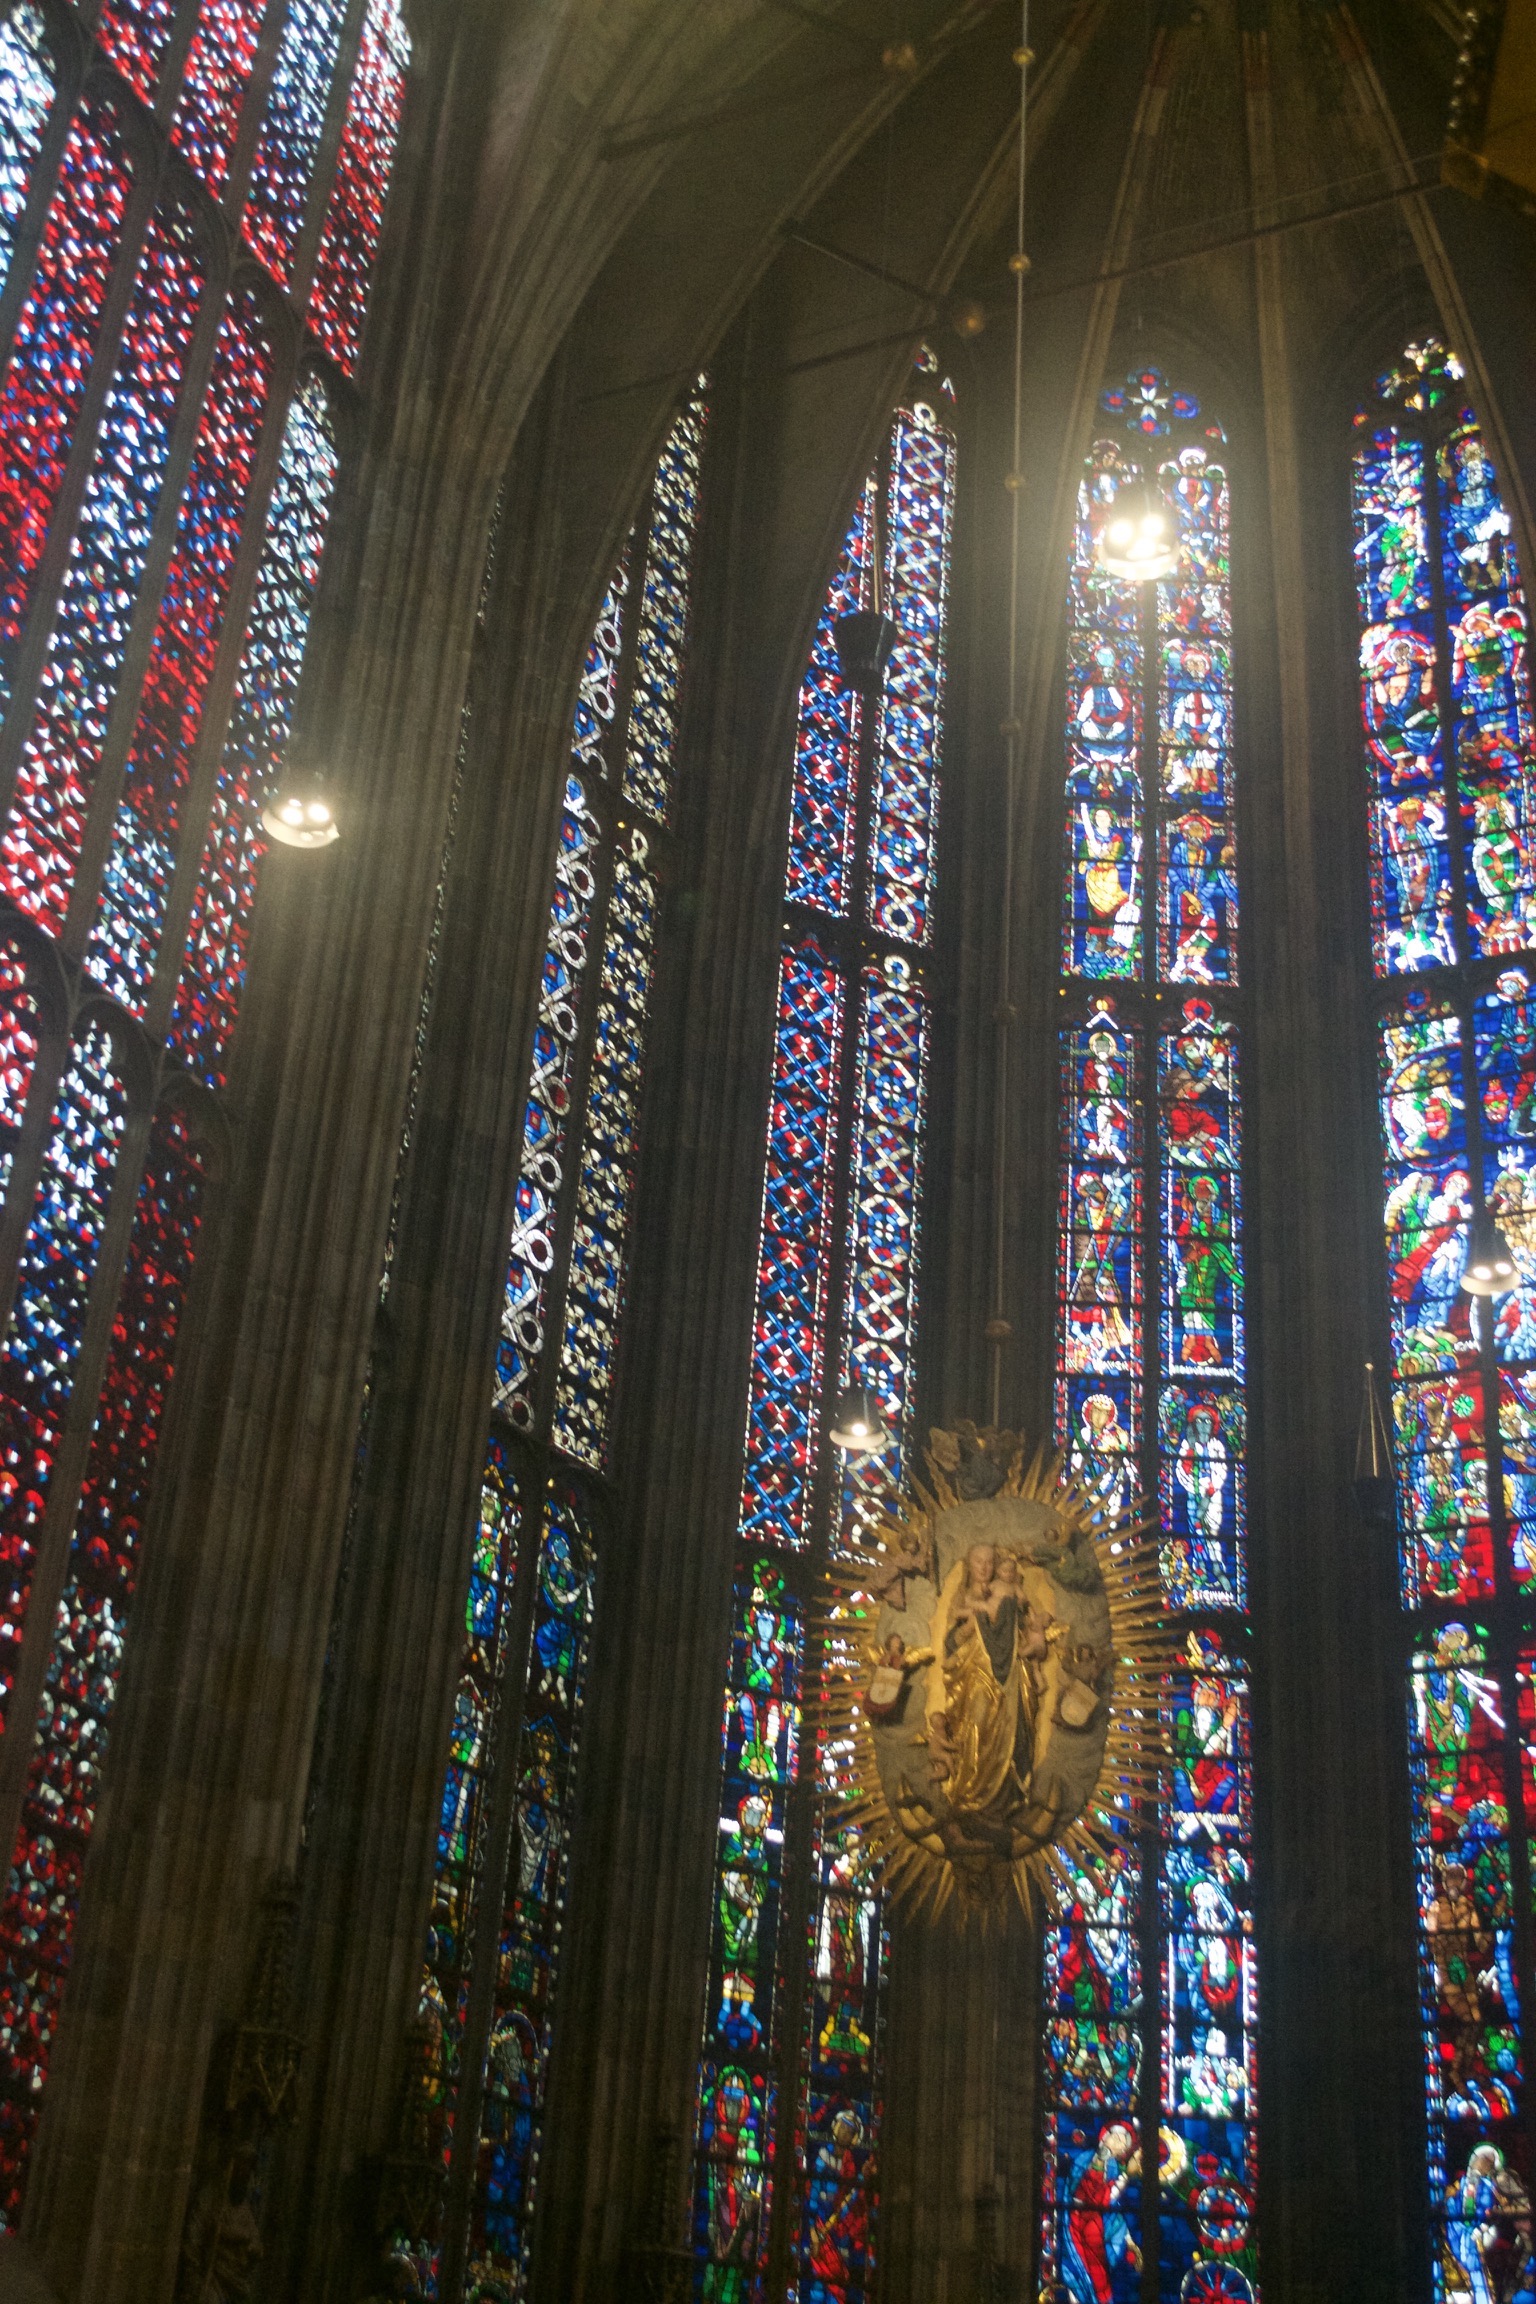 The apse of a Gothic cathedral illuminated with stained glass.  An emblem of Mary and the infant Jesus hangs from the ceiling.